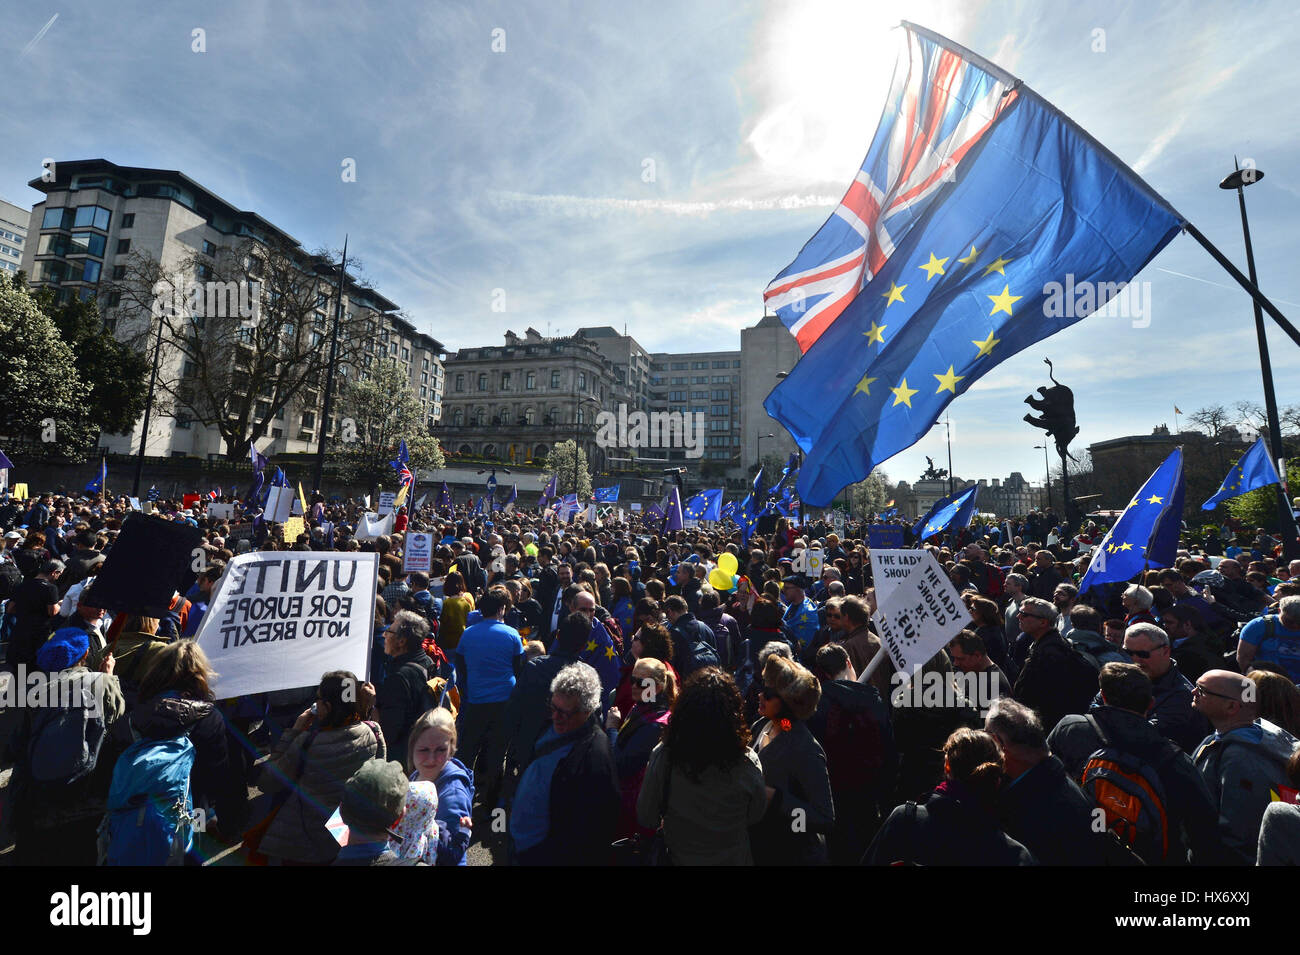 A Union flag and a European Union flag are flown together by a pro-EU protester taking part in a March for Europe rally against Brexit in central London. Stock Photo